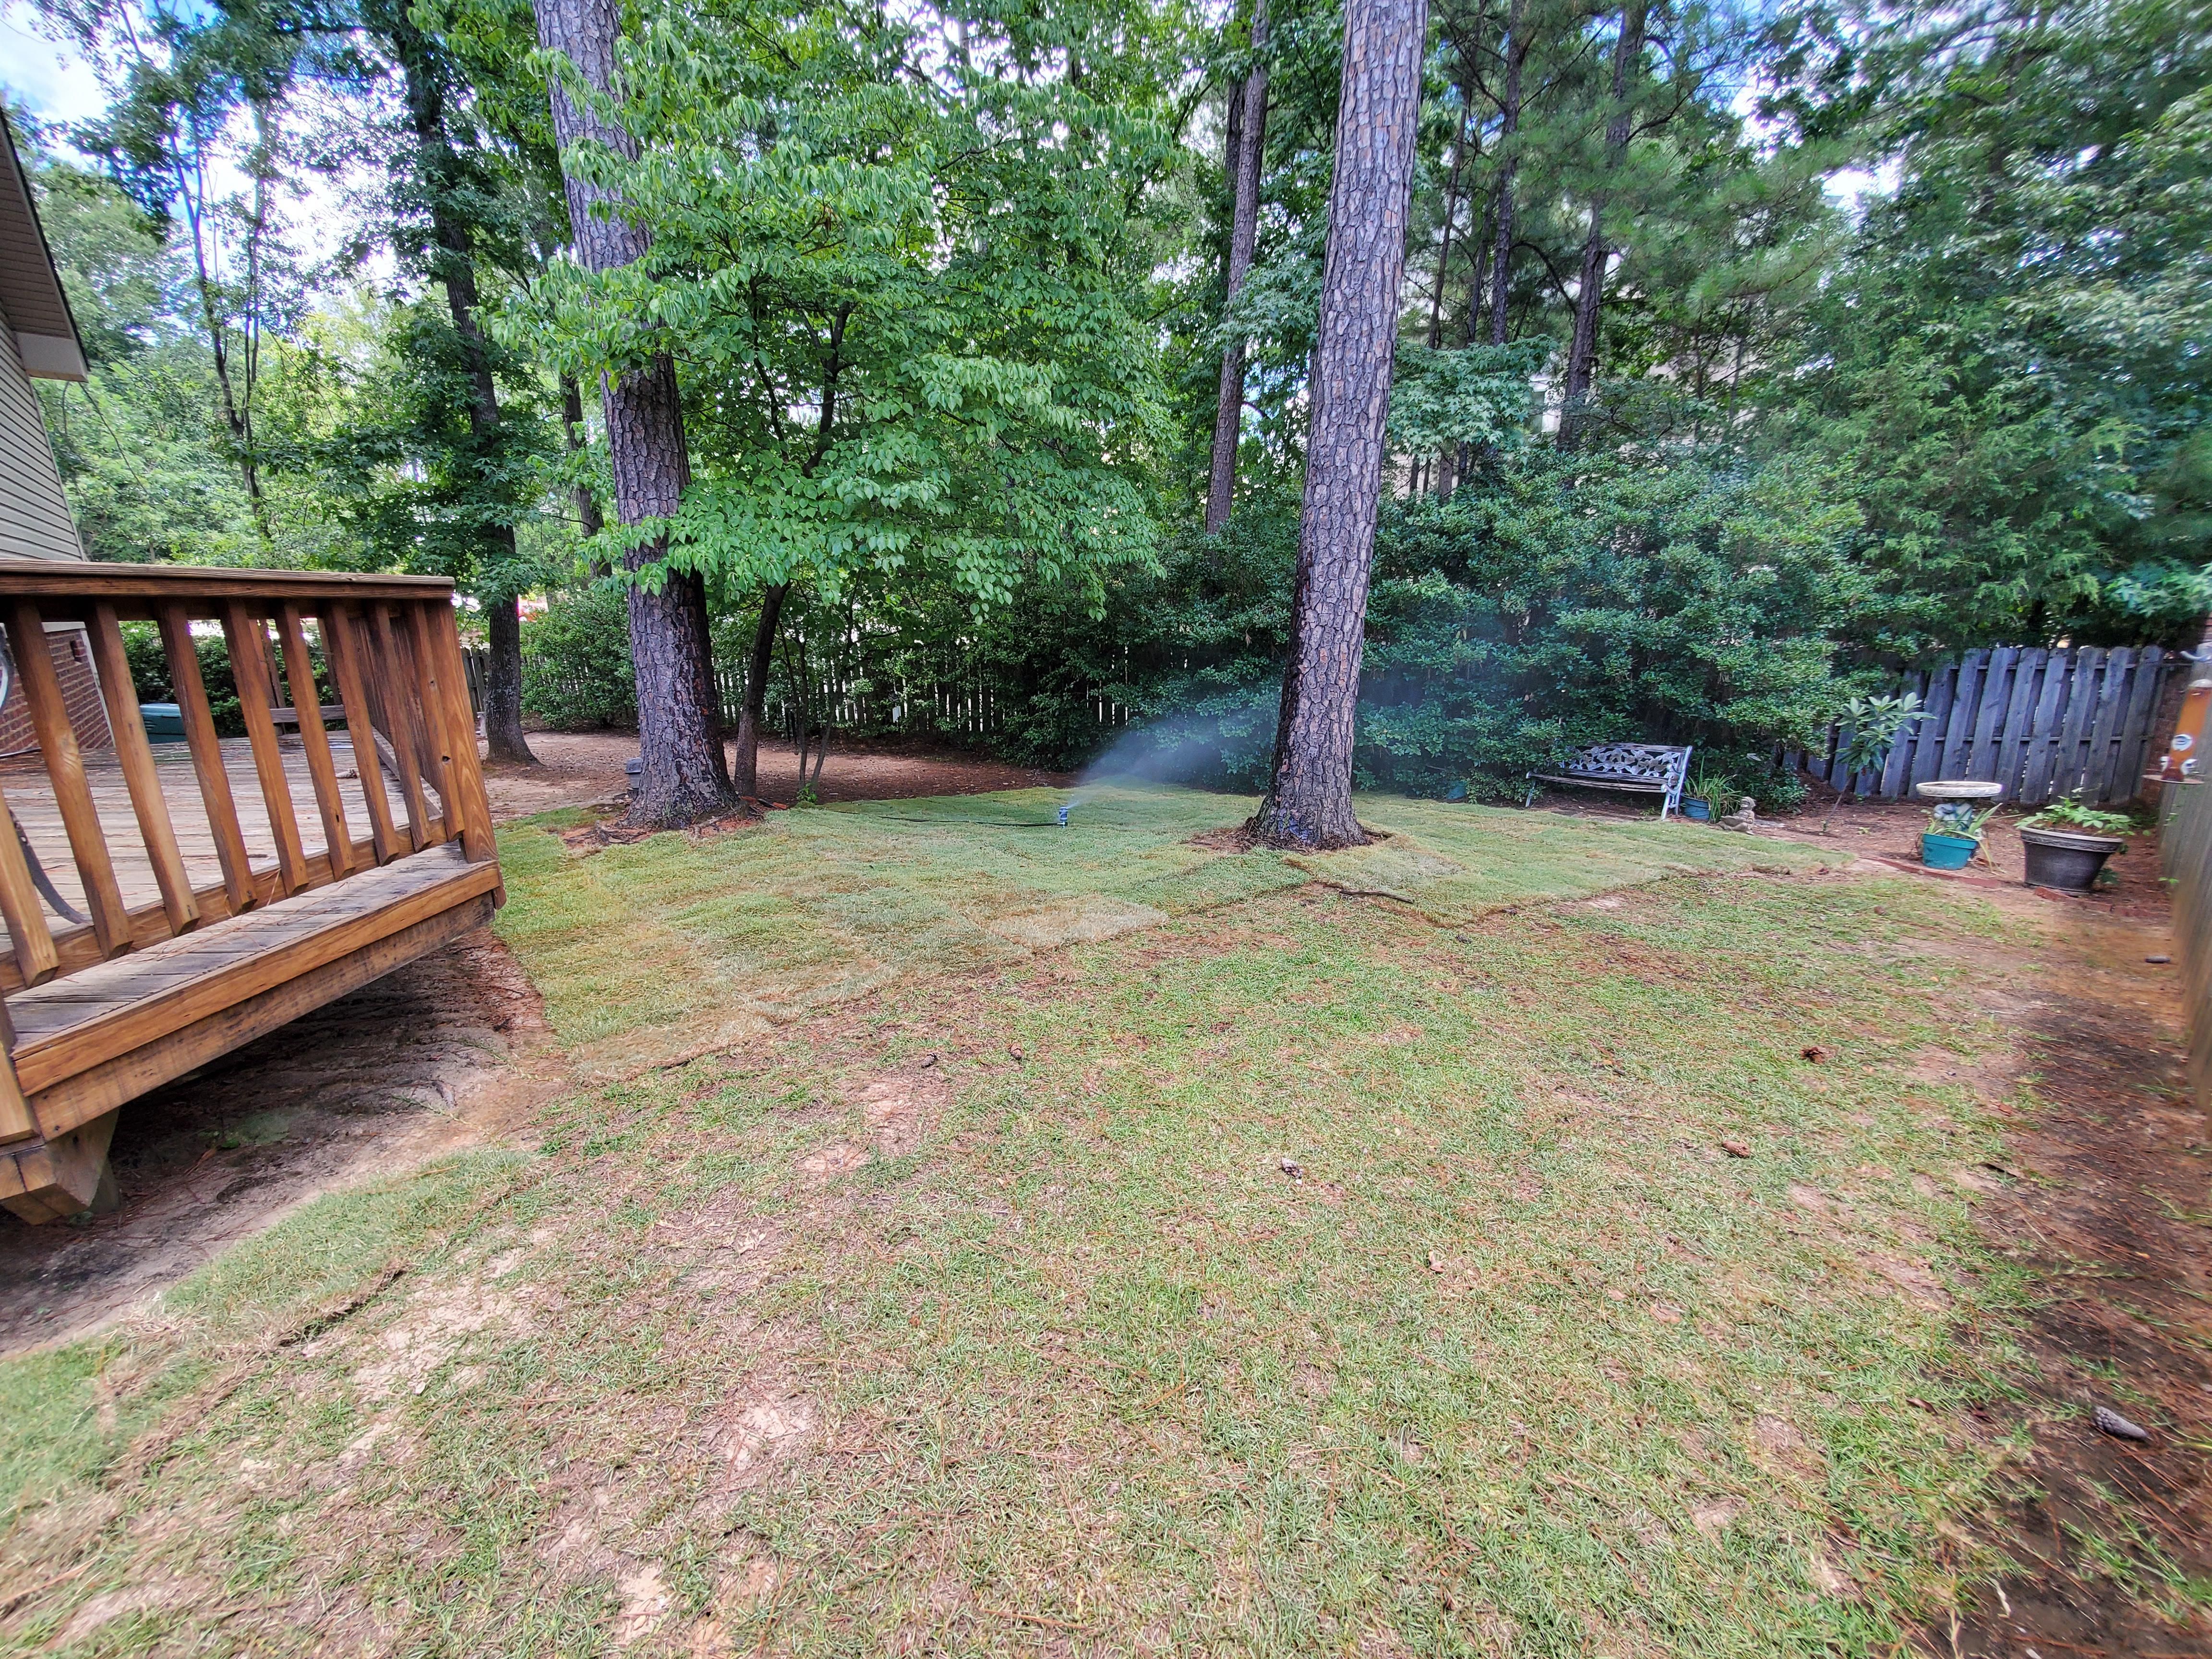 All Photos for Muddy Paws Landscaping in Lugoff, SC